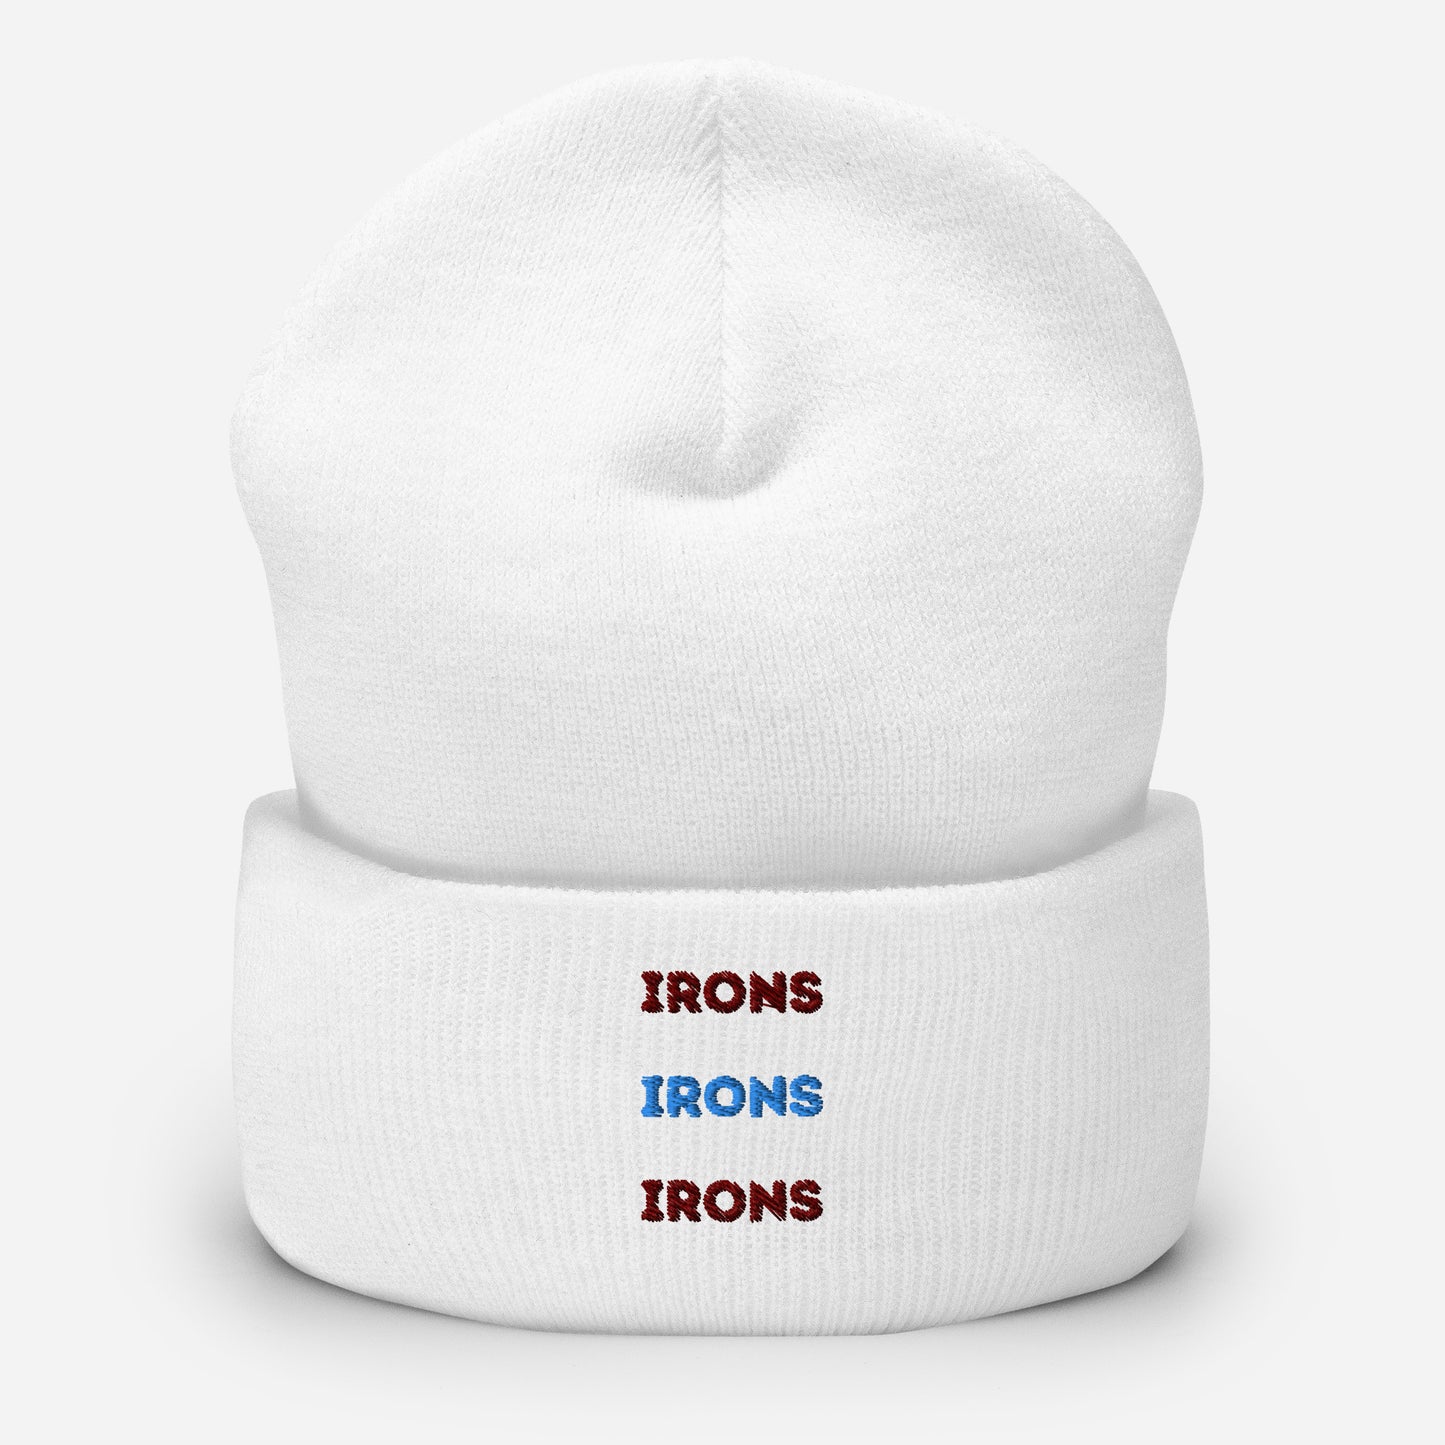 Irons Irons Irons Cuffed Beanie Hat